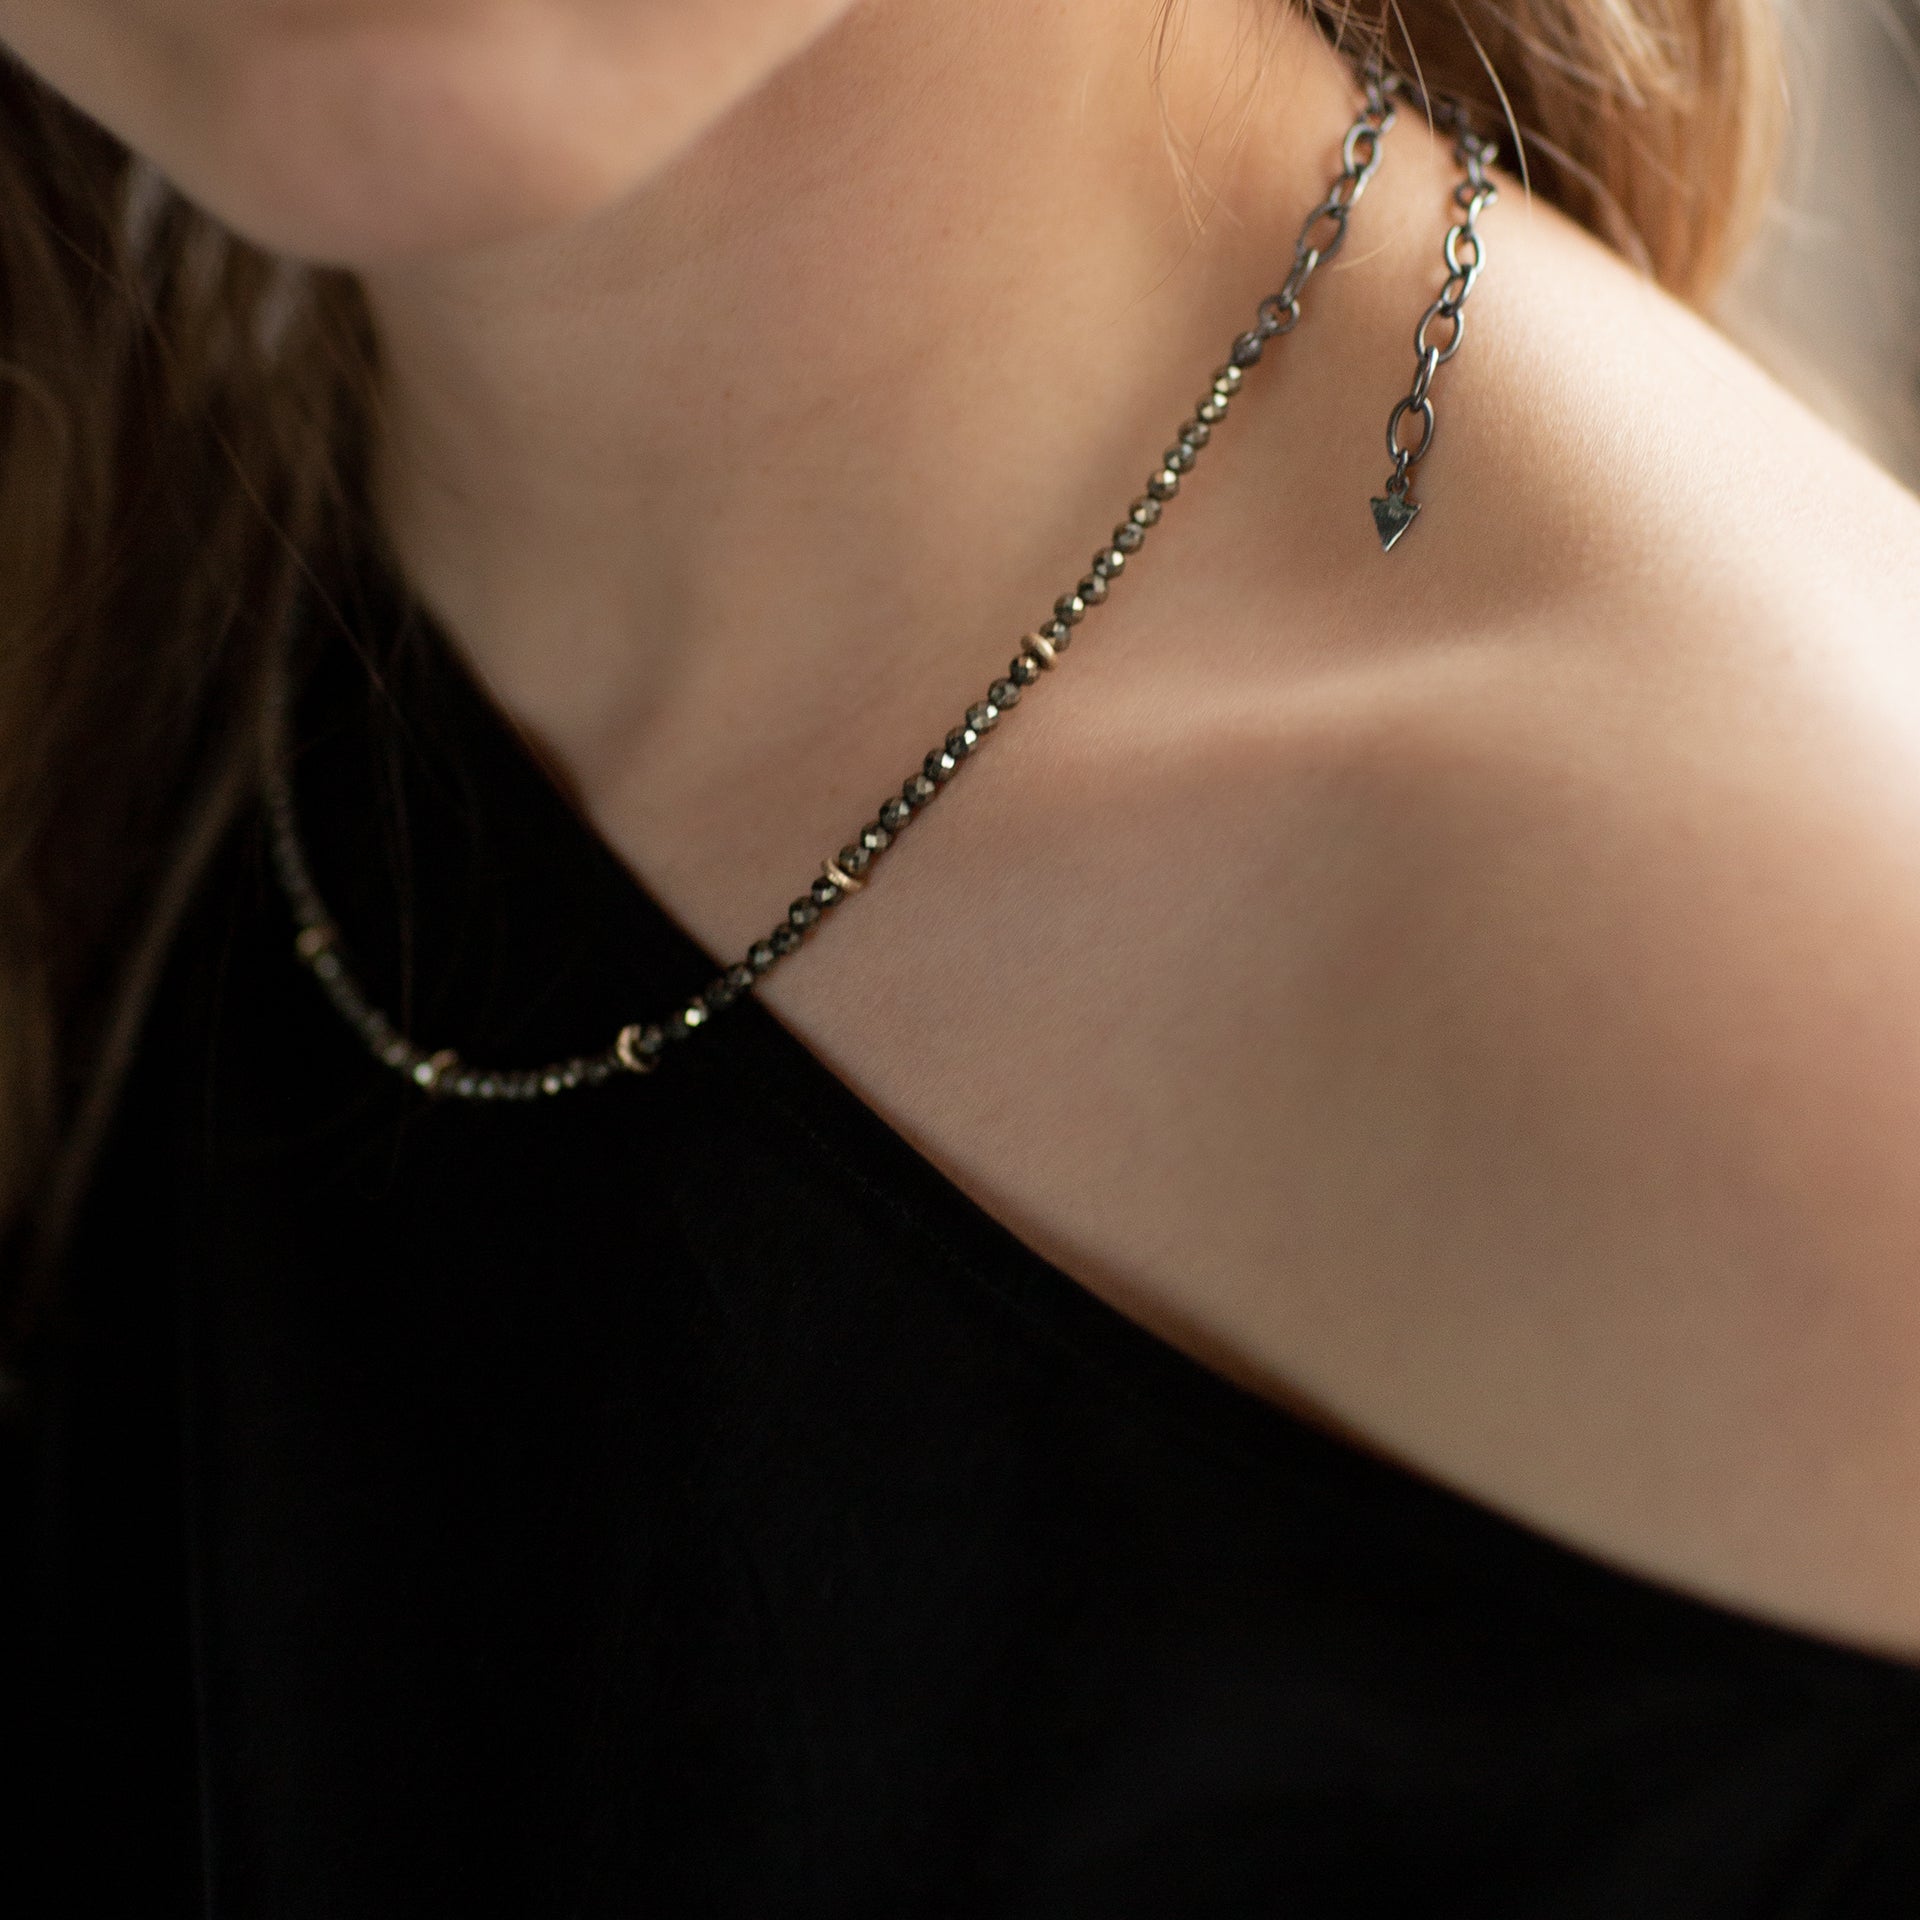 The neck and shoulder of model Eden is shown wearing the faceted Pyrite and Gold beaded choker necklace with oxidised sterling silver chain. Handmade by Emily Eliza Arlotte in Hobart, Tasmania. Photography by Cassie Sullivan.